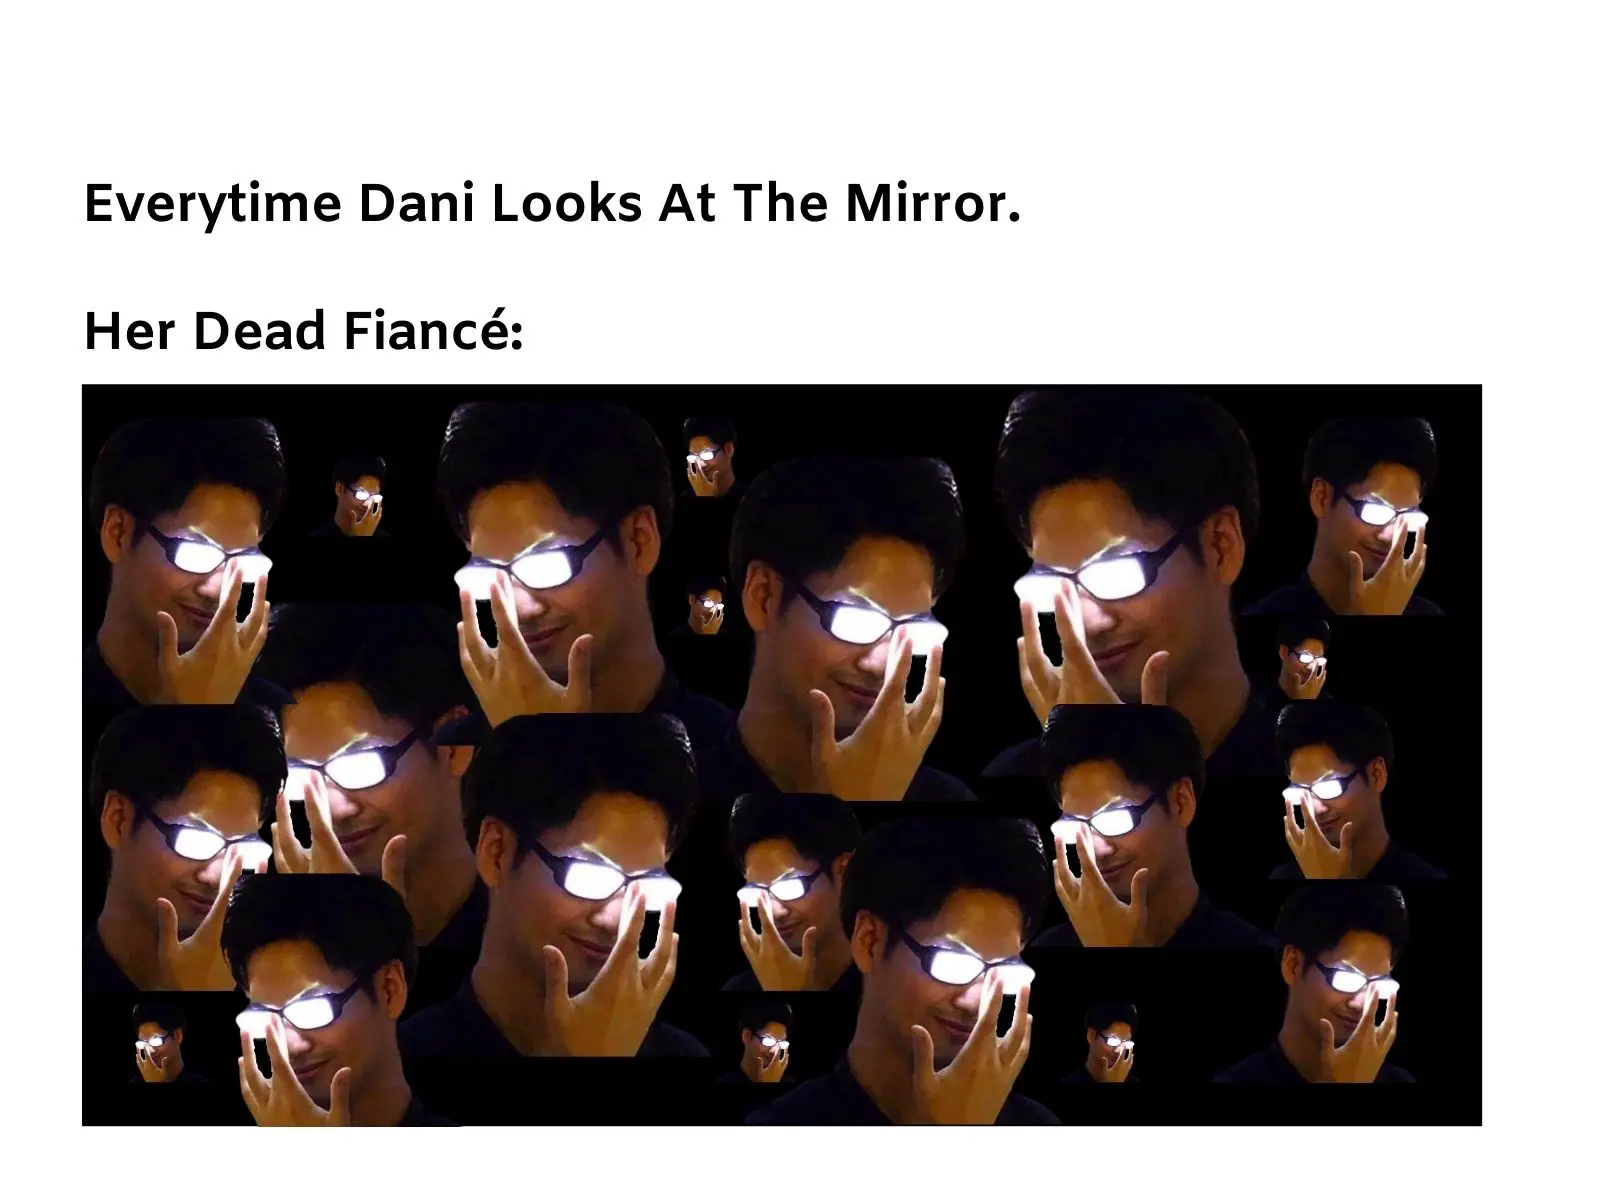 The Haunting of Bly Manor meme on Danielle mirror reflection